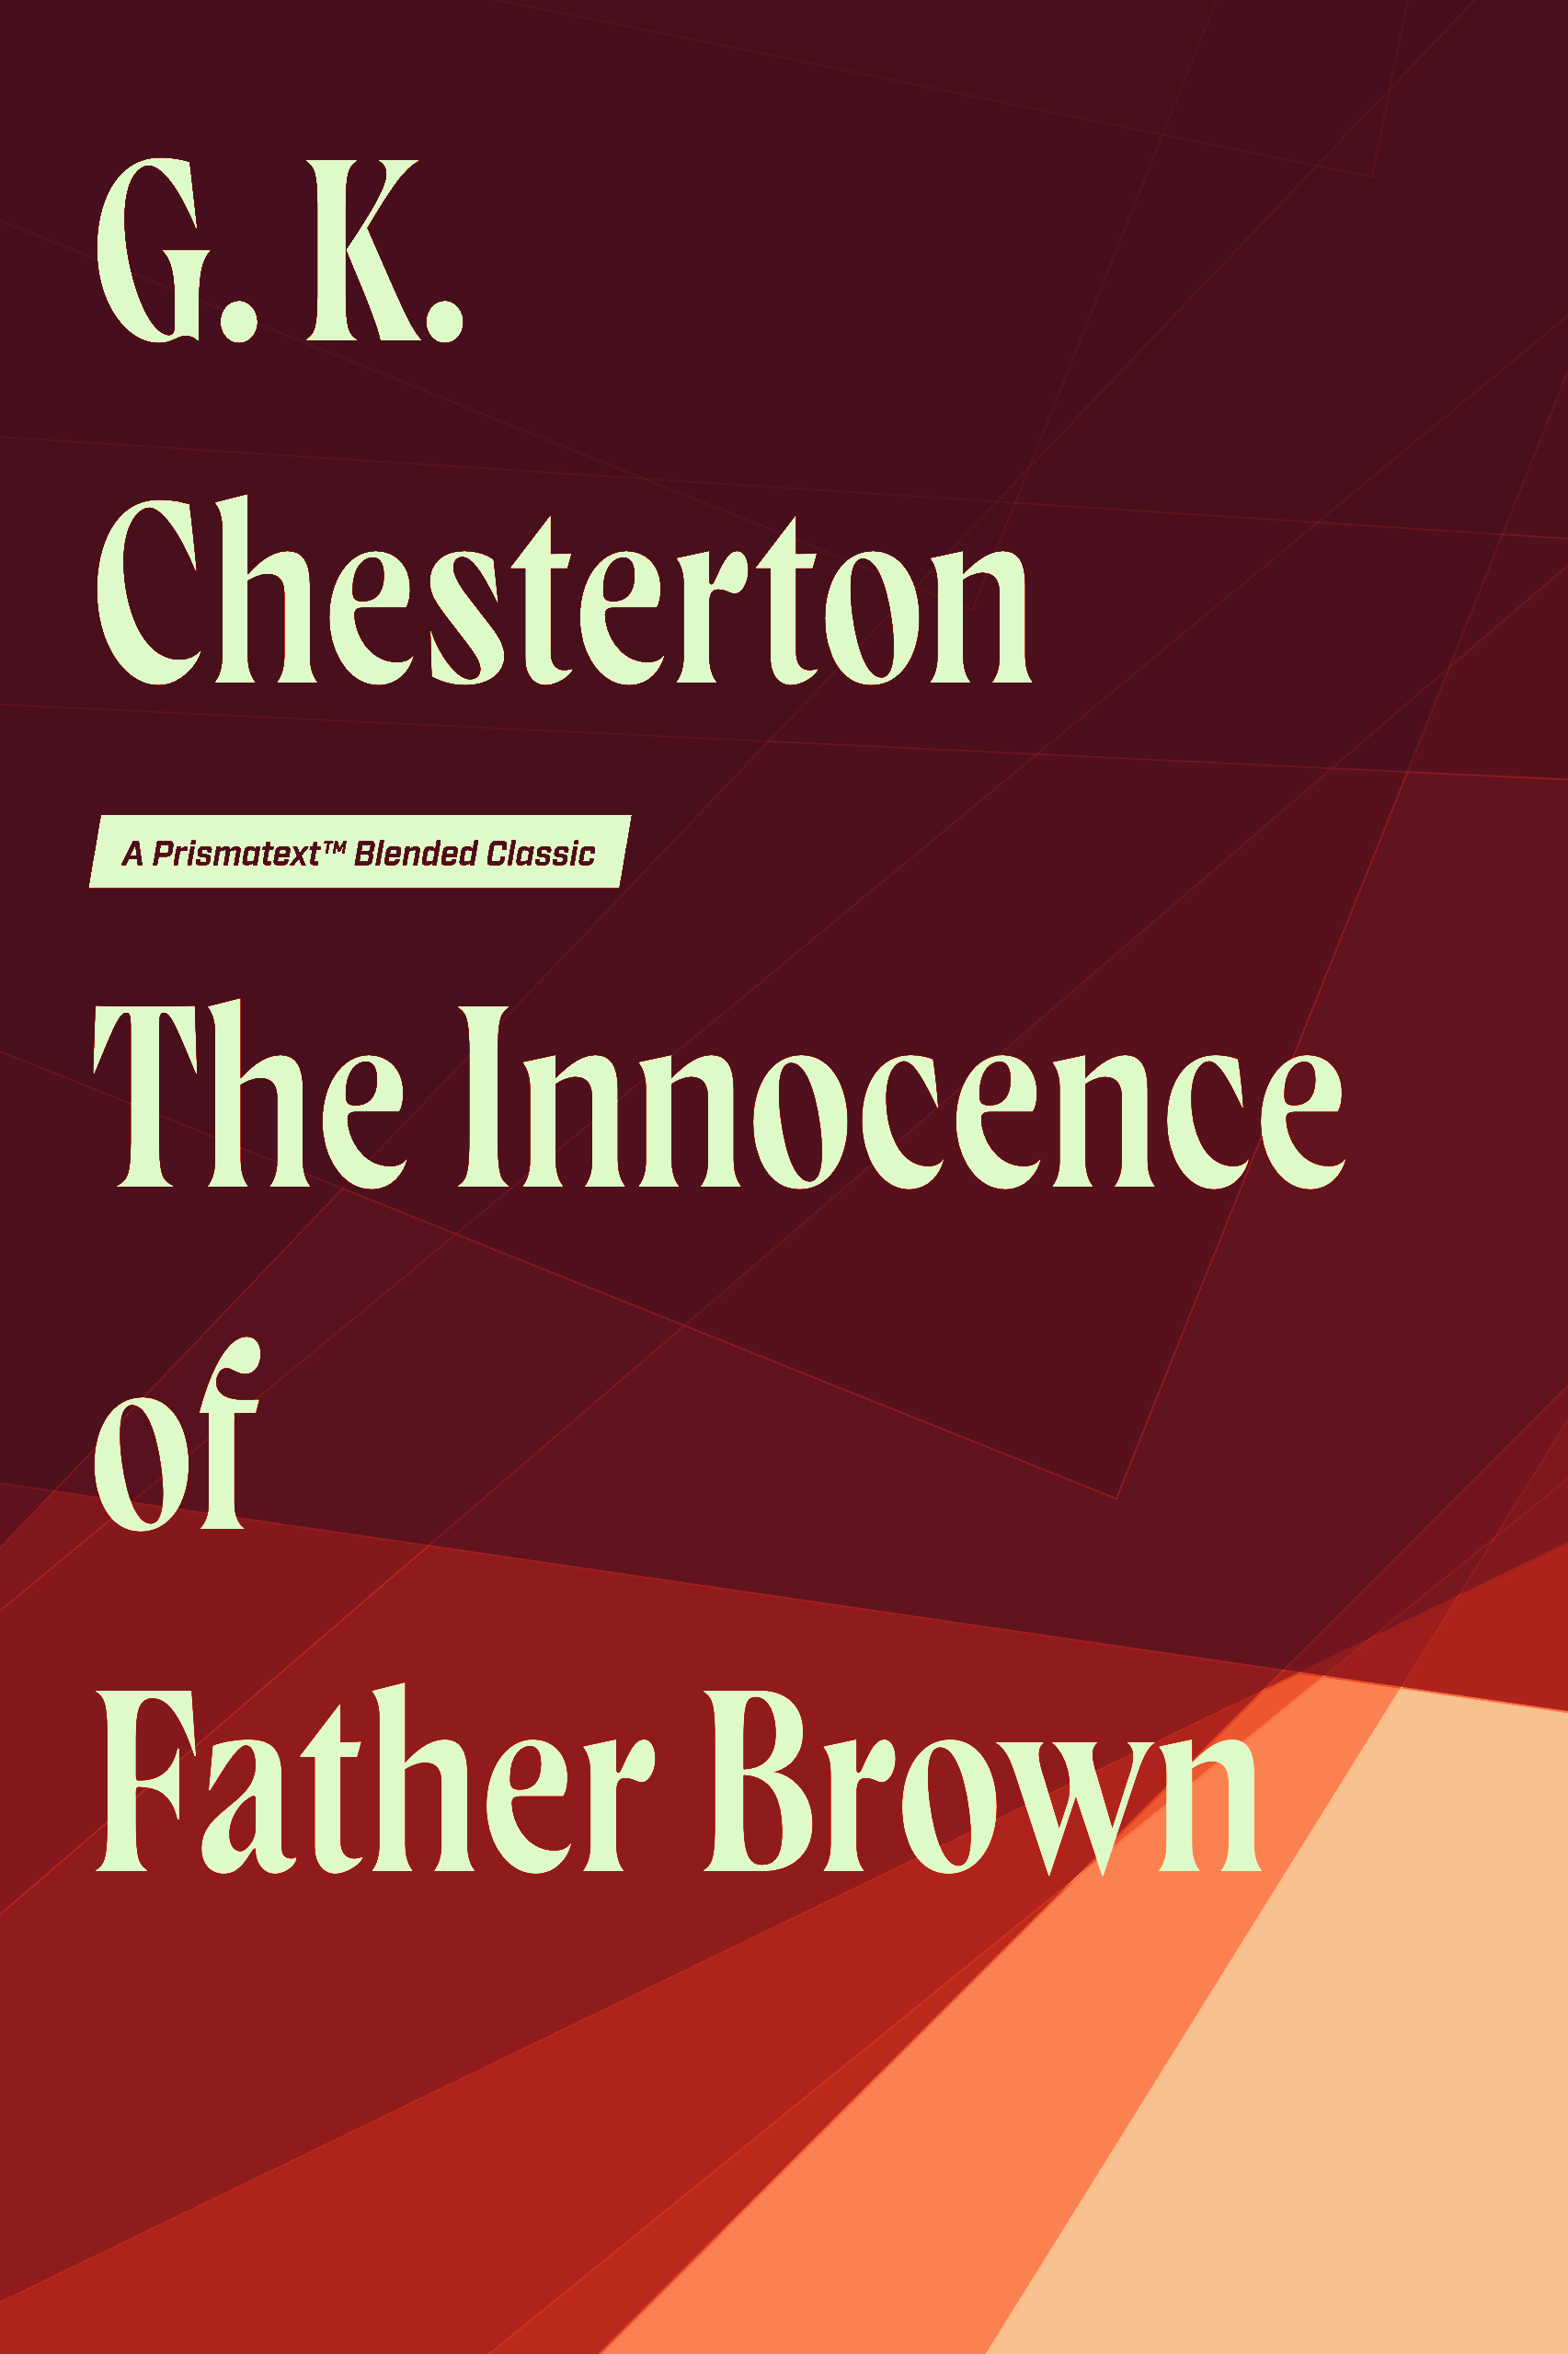 The Innocence of Father Brown by G. K. Chesterton